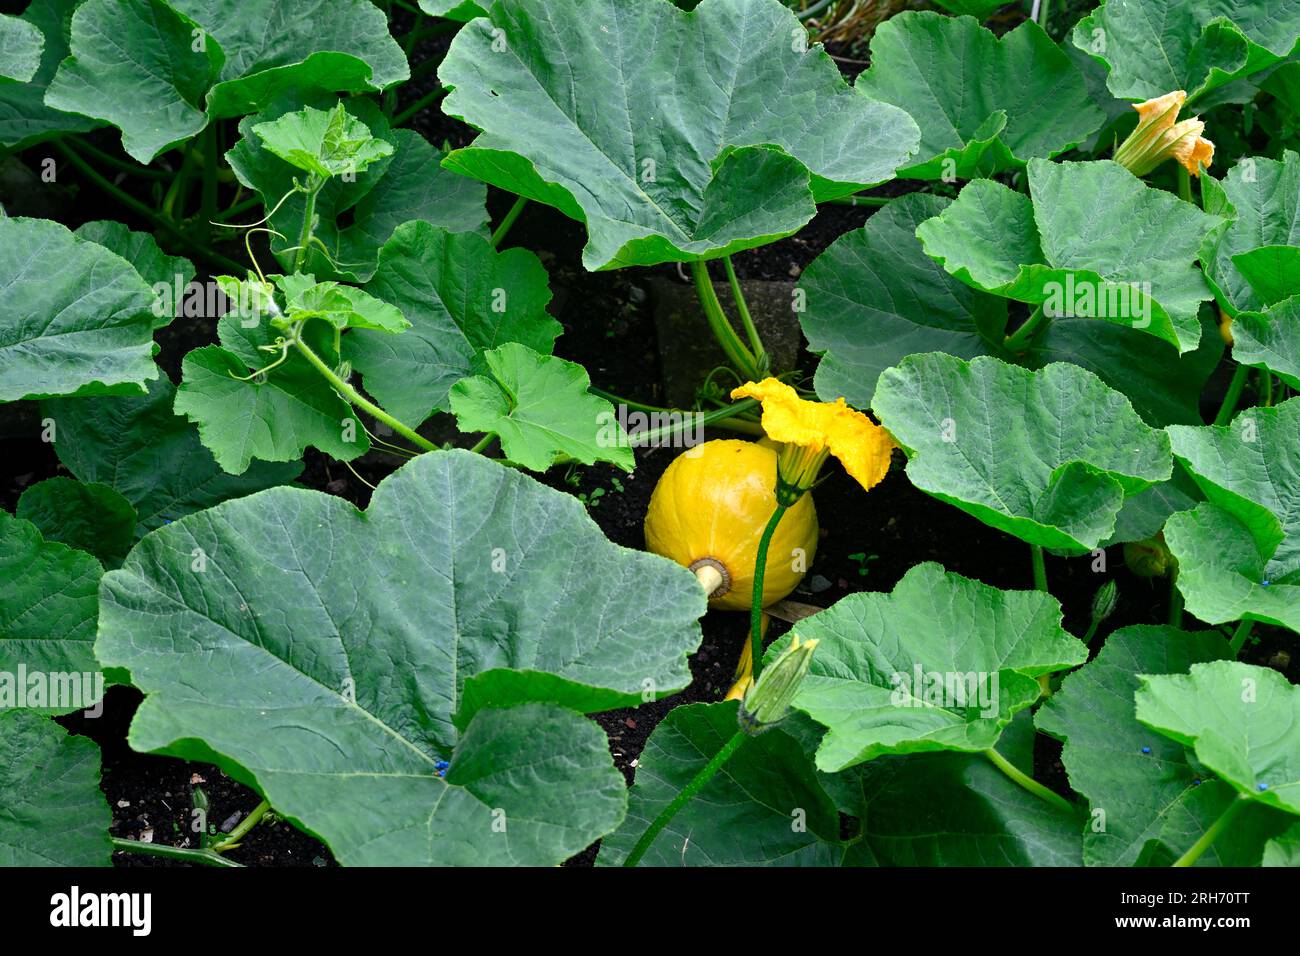 Squash, Uchiki Kuri, growing partly hidden in garden by the large large leaves of its vine Stock Photo